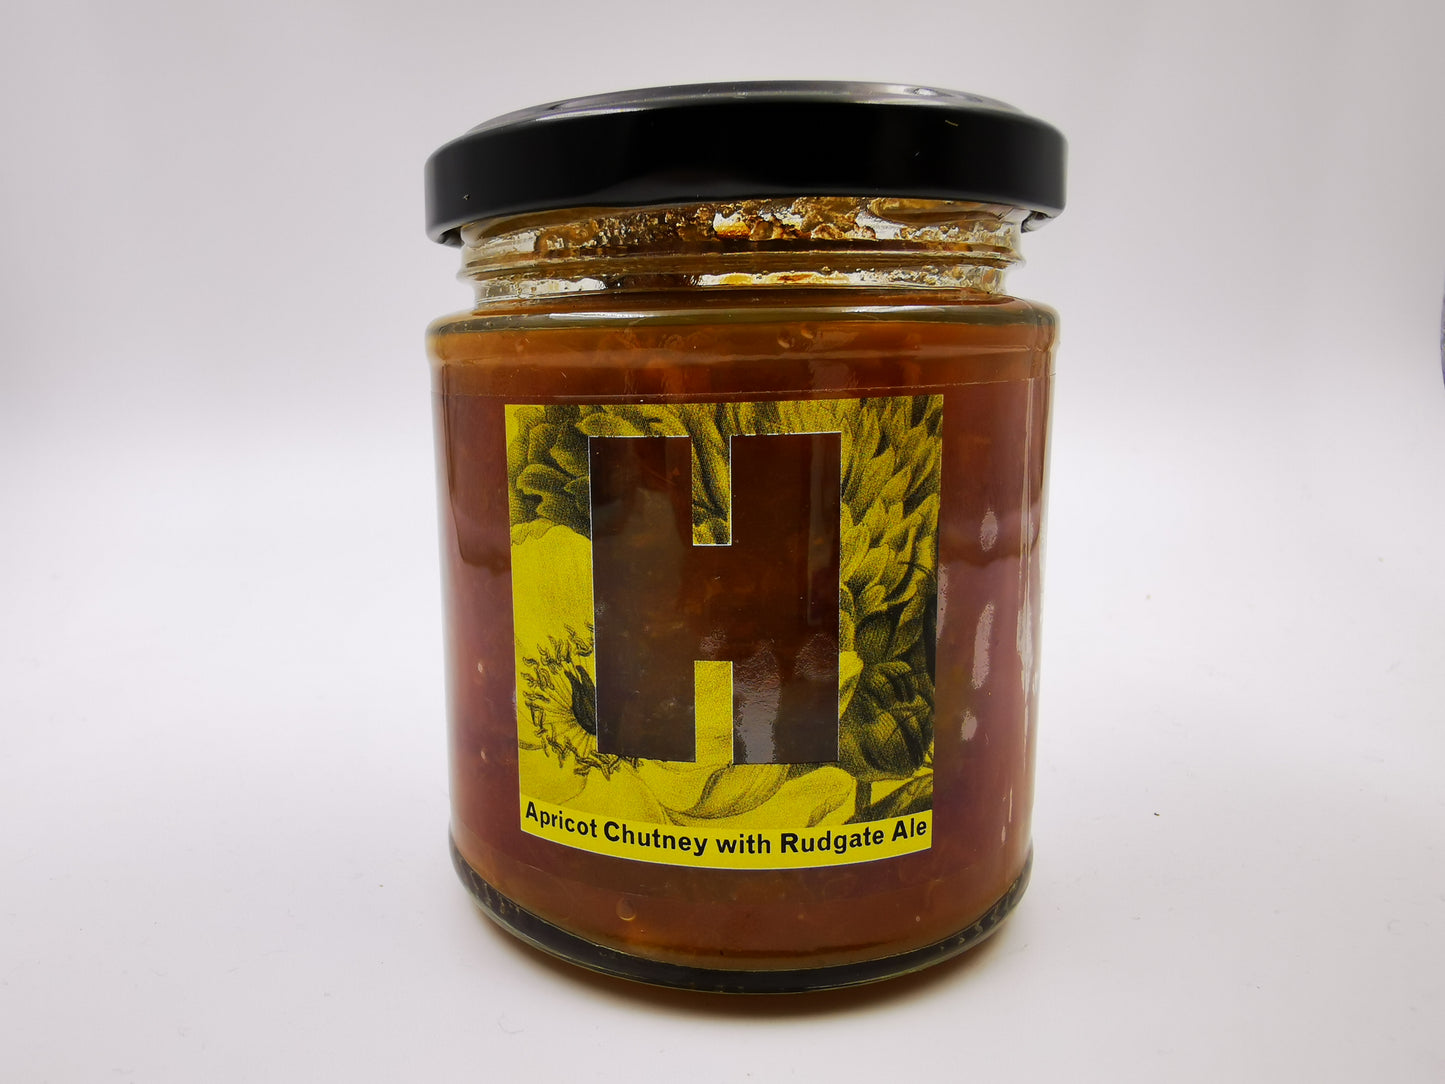 Apricot Chutney with Hop on Board Ale (Rudgate)